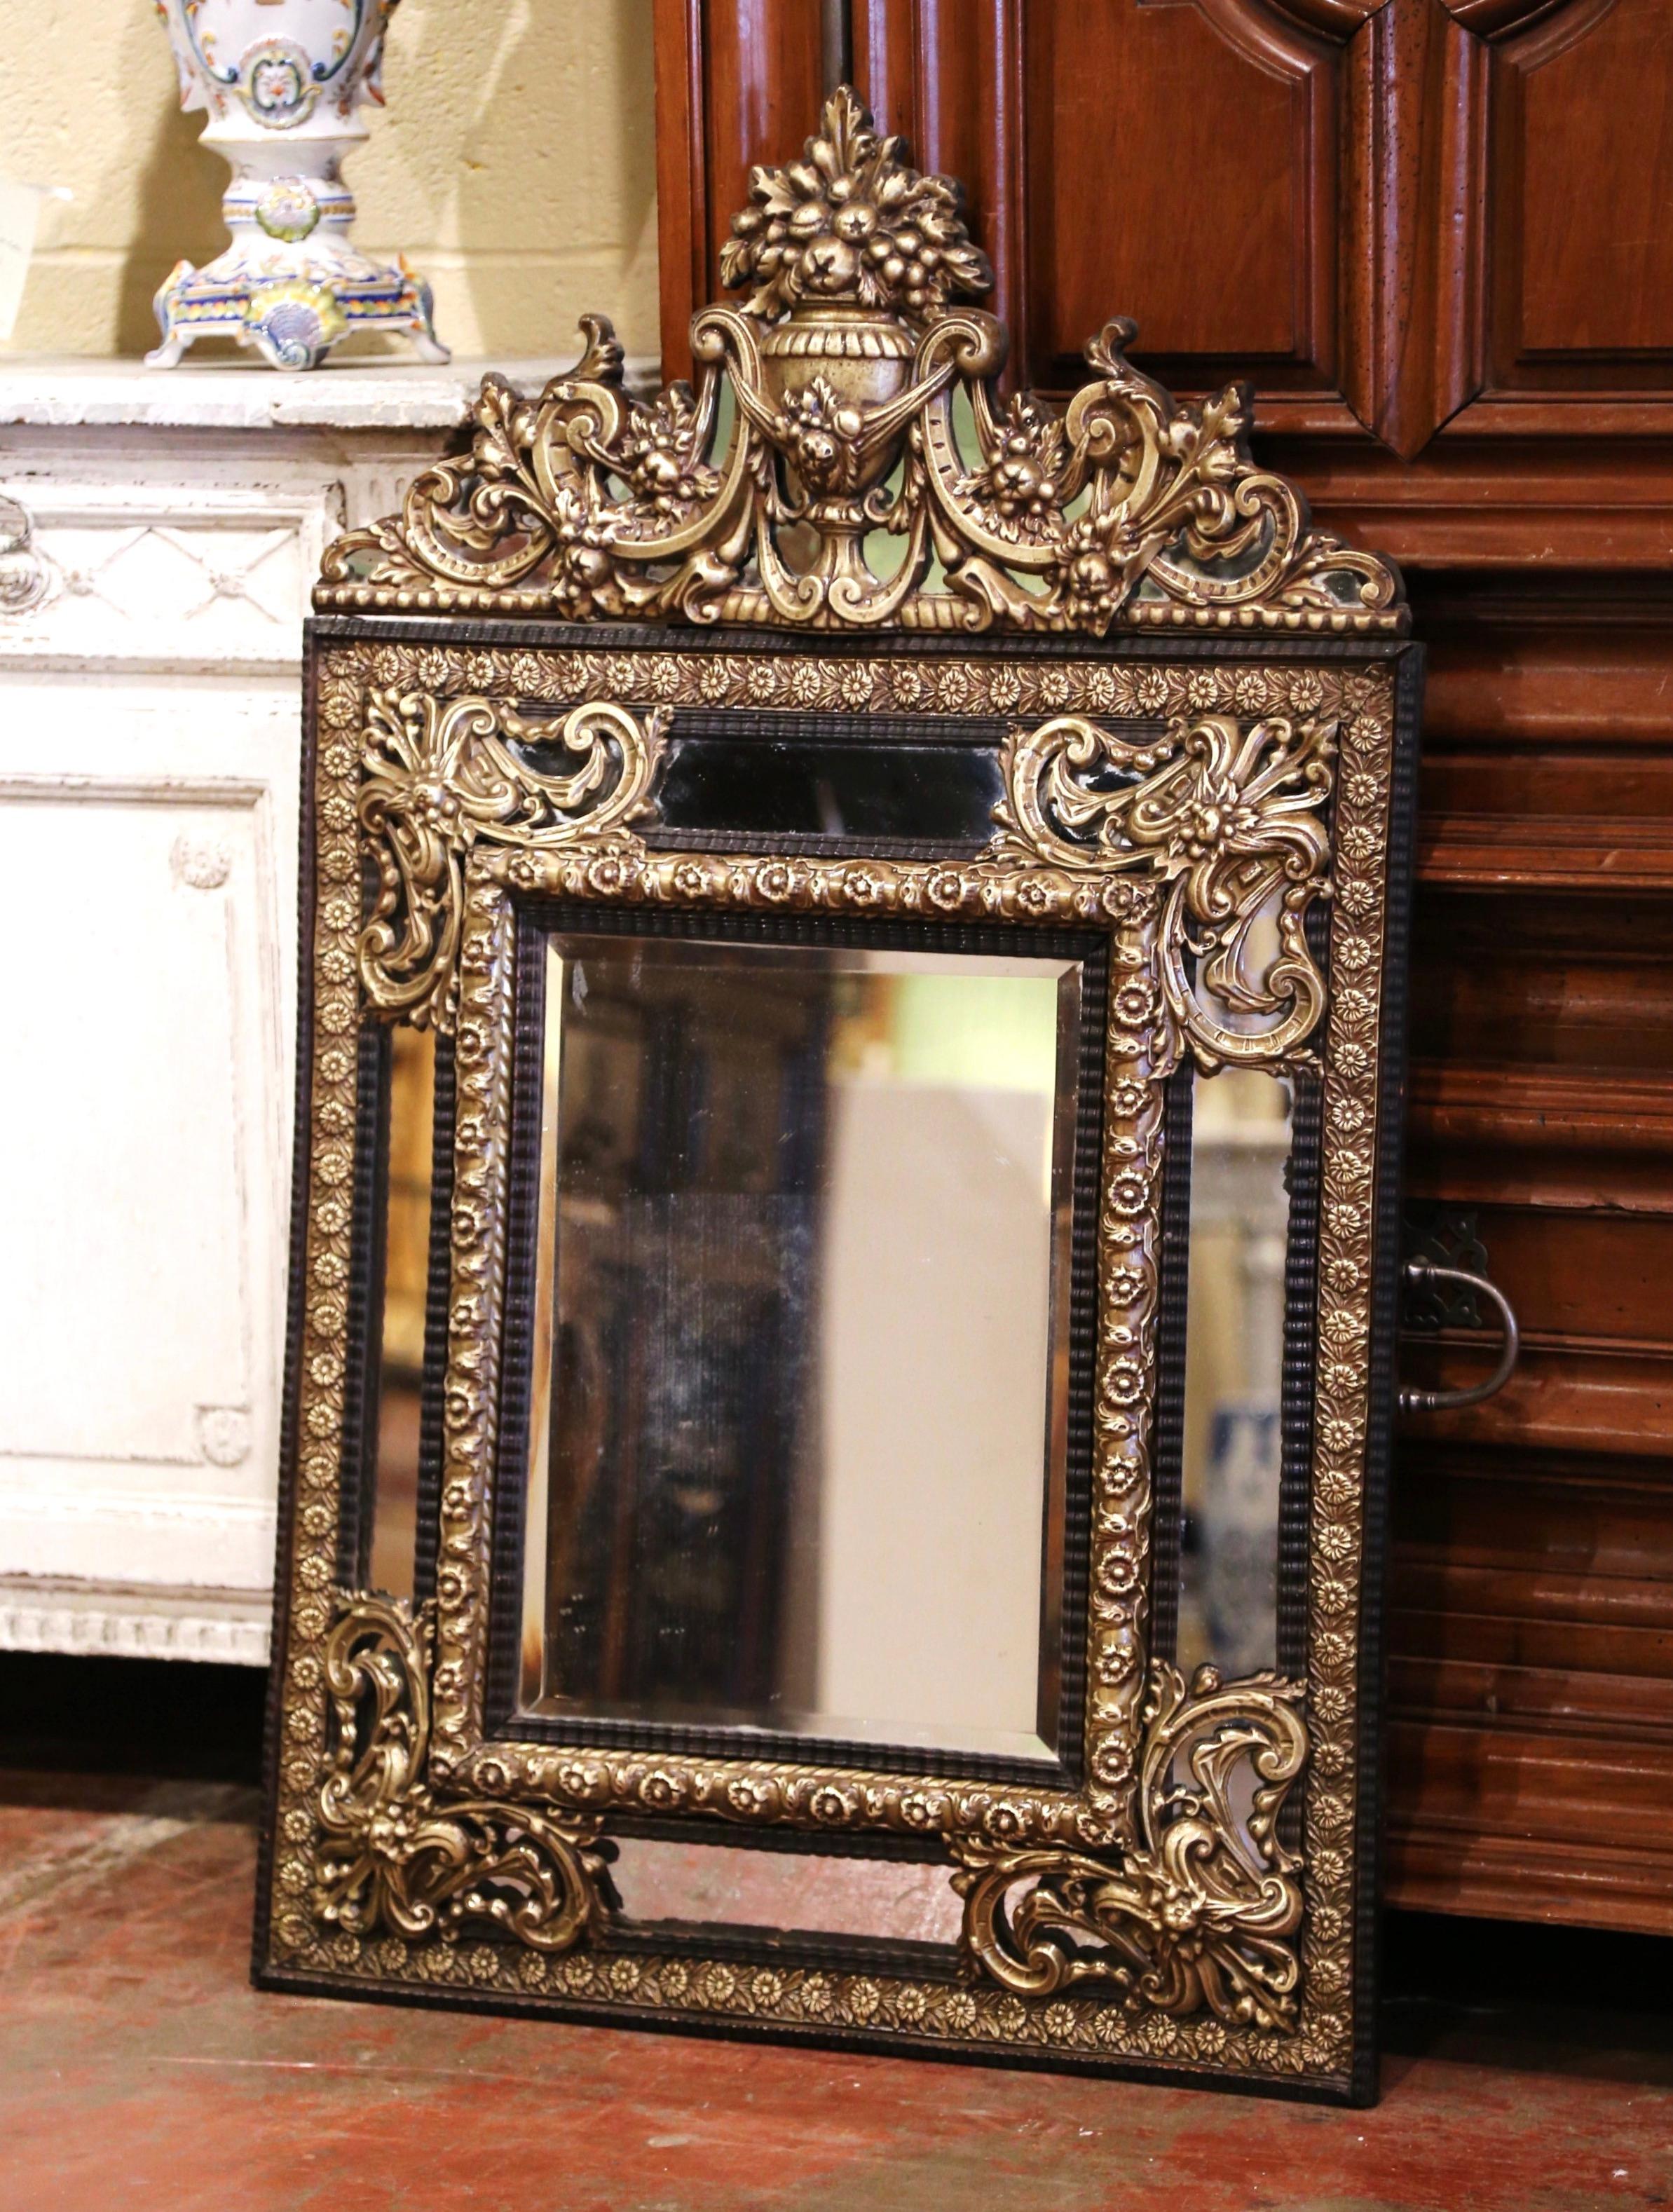 Created in France, circa 1870, the elegant antique wall mirror is decorated with intricate repousse decor including a cartouche at the pediment featuring a floral vase with foliage and scrolled motifs in high relief on the sides. The center mirror